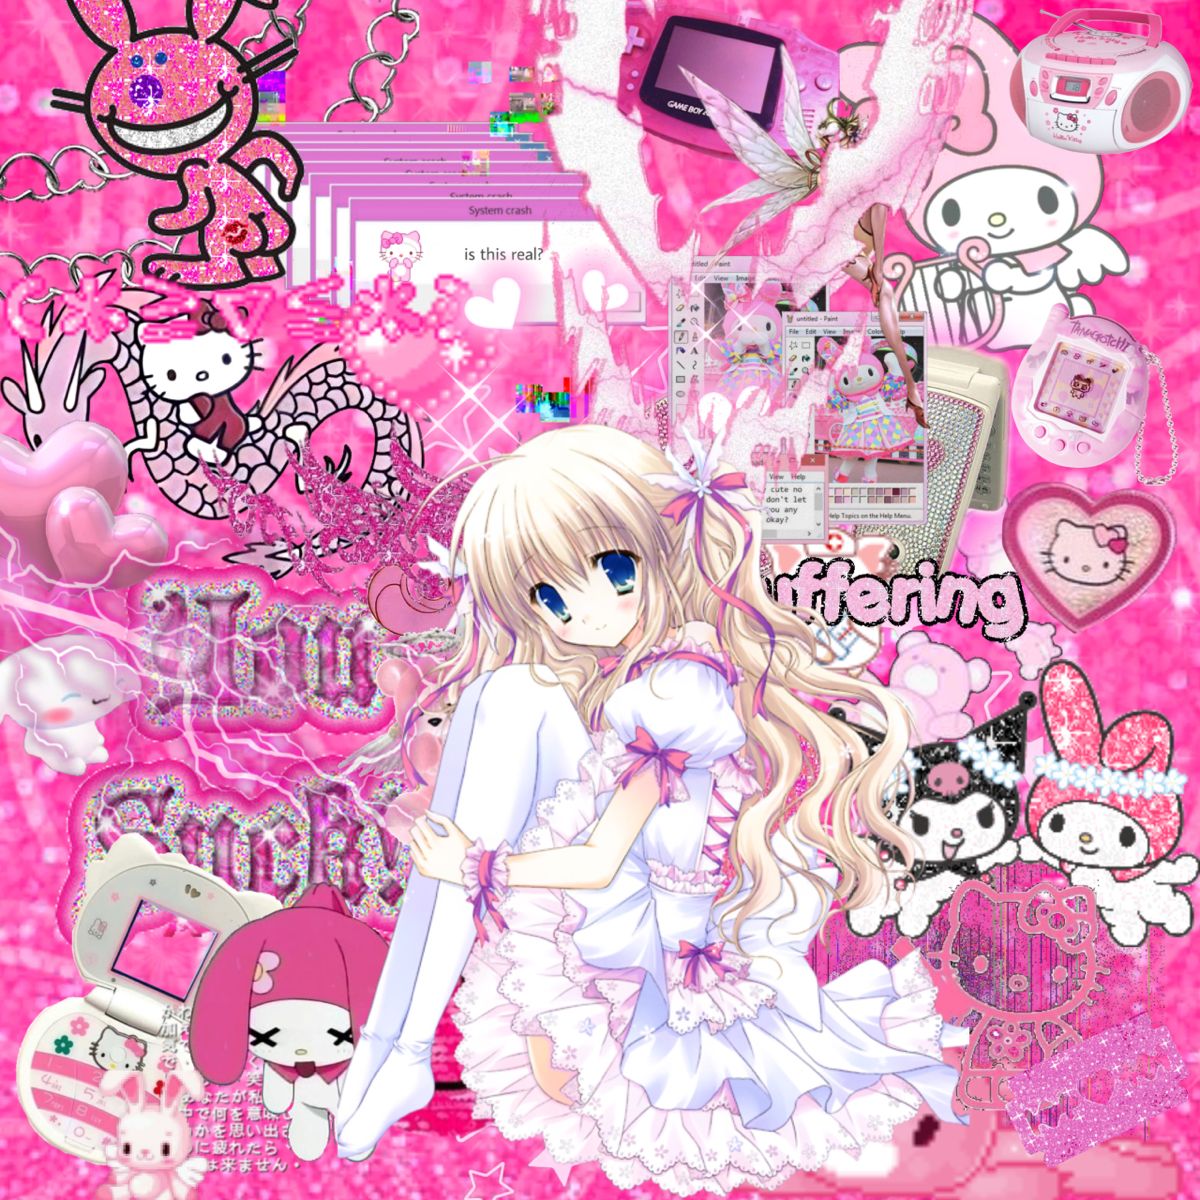 Animecore girl 2000s y2k. Hello kitty iphone wallpaper, Animation art character design, Pink posters